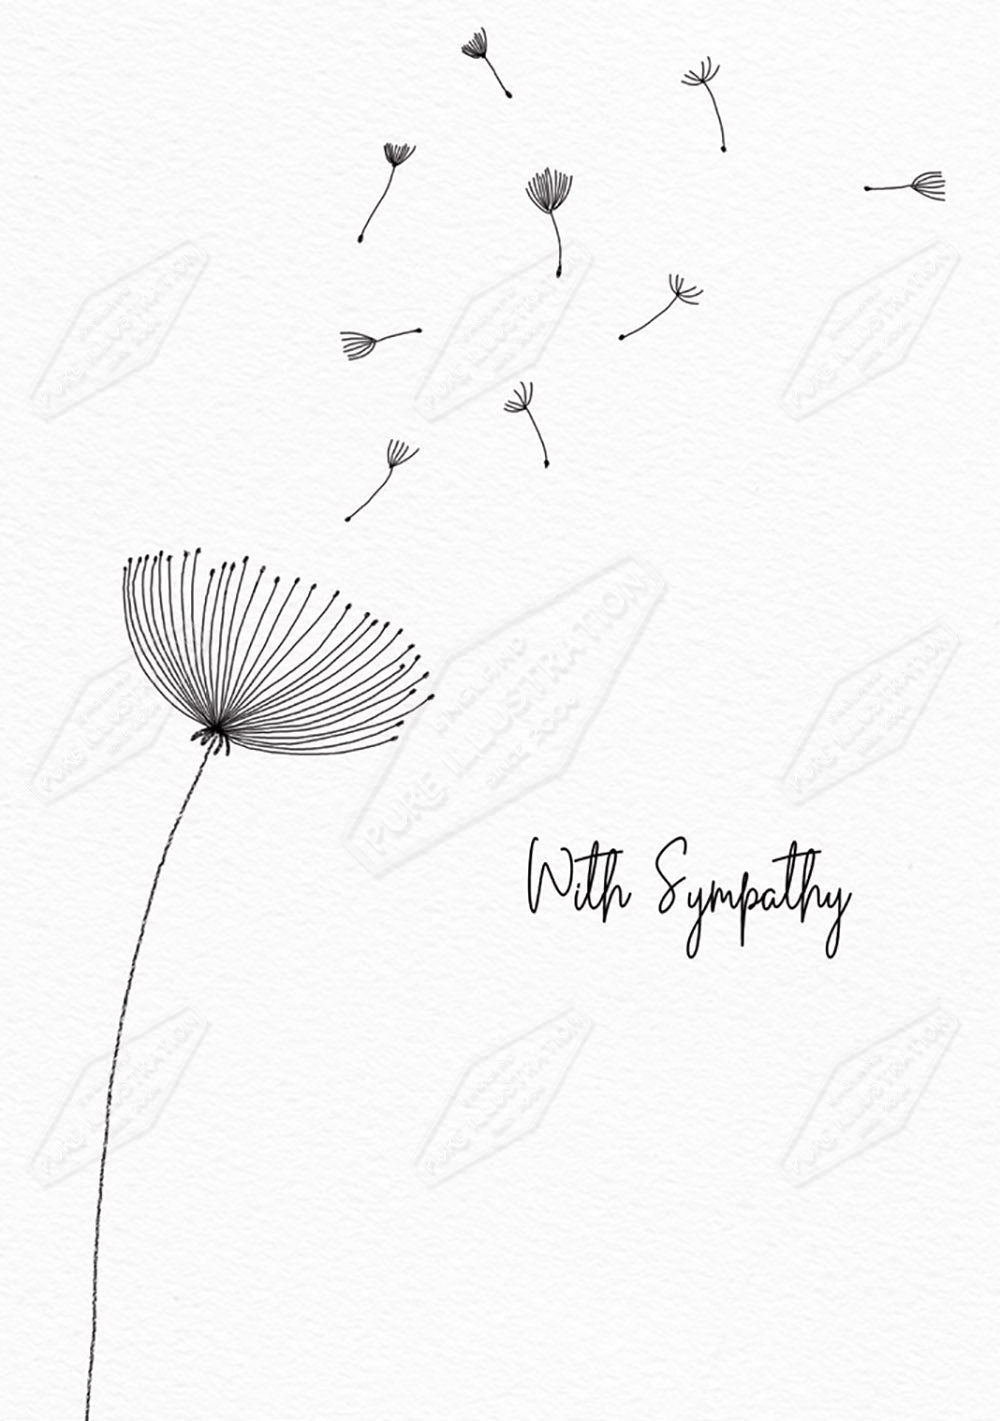 Synpathy Greeting Card Design by Cory Reid for Pure art Licensing Agency